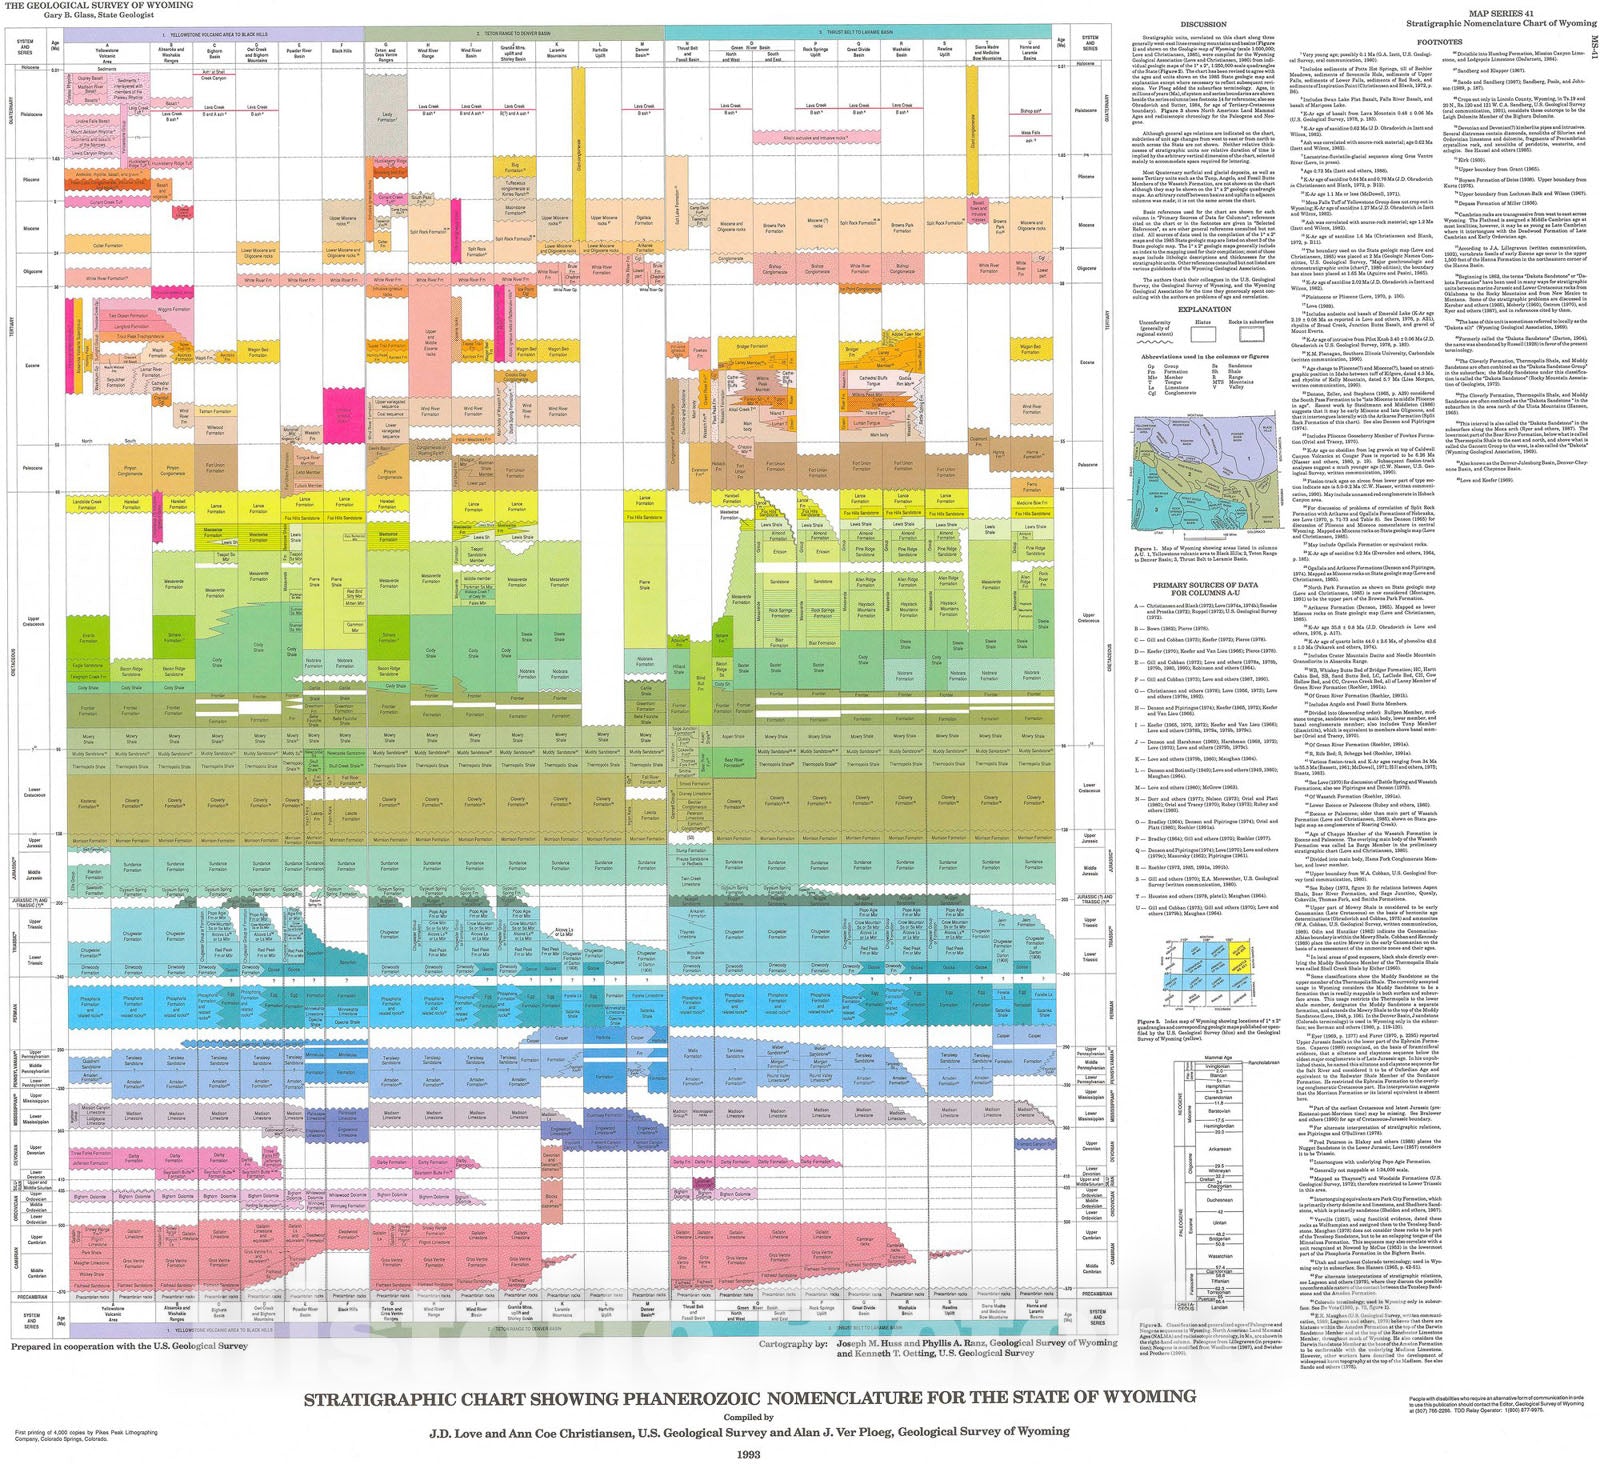 Map : Stratigraphic chart showing Phanerozoic nomenclature for the state of Wyoming, 1993 Cartography Wall Art :